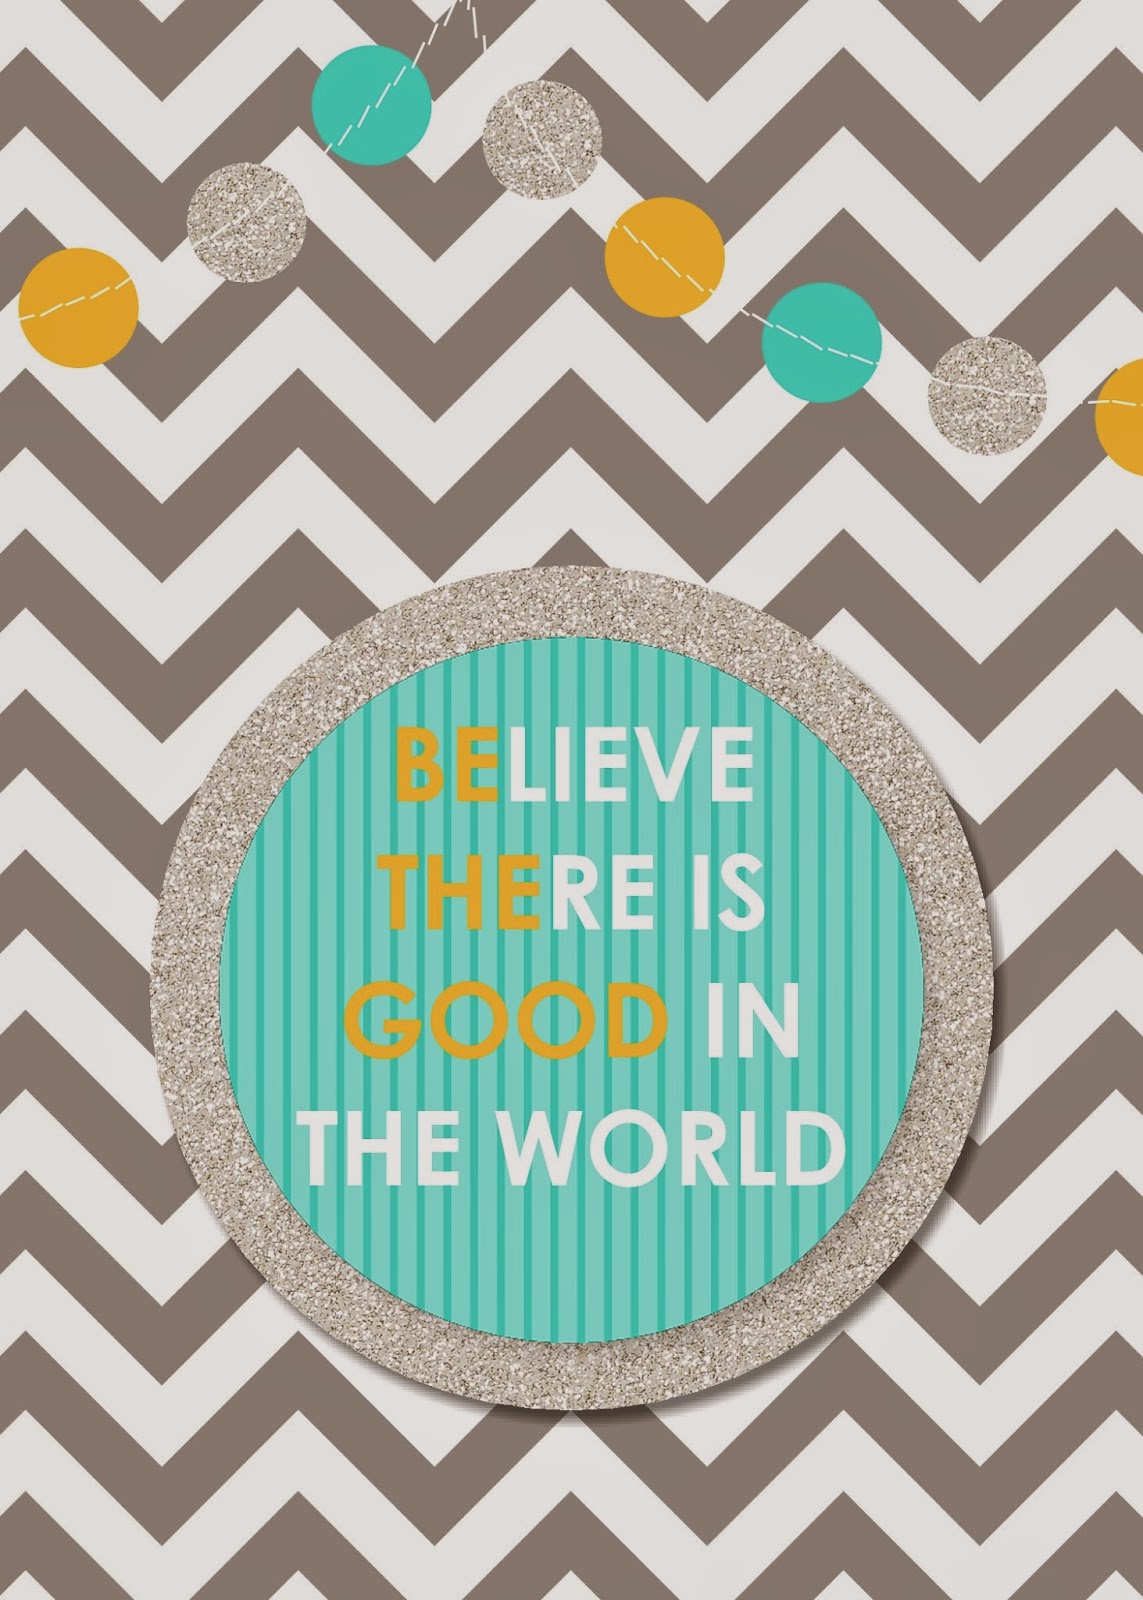 You Can Disney Quote iPhone Wallpaper In Your Puter By